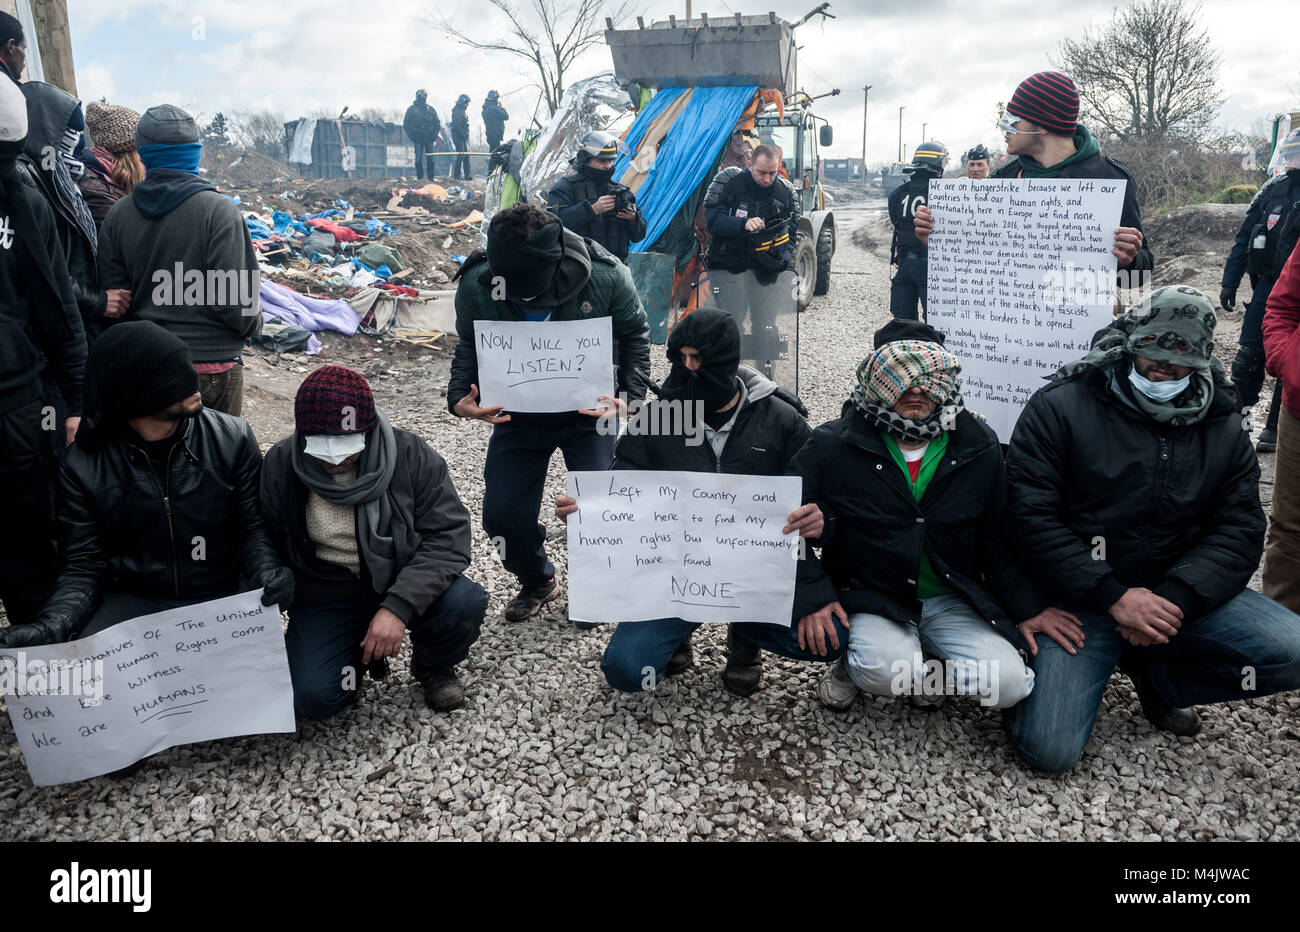 Calais Jungle, Northern France. 02 March, 2016. A group of Iranian asylum seekers stitch up their mouths to signify that their voices are not being heard by the French authorities demolishing the Calais Jungle refugee camp near Calais in Northern France. Stock Photo